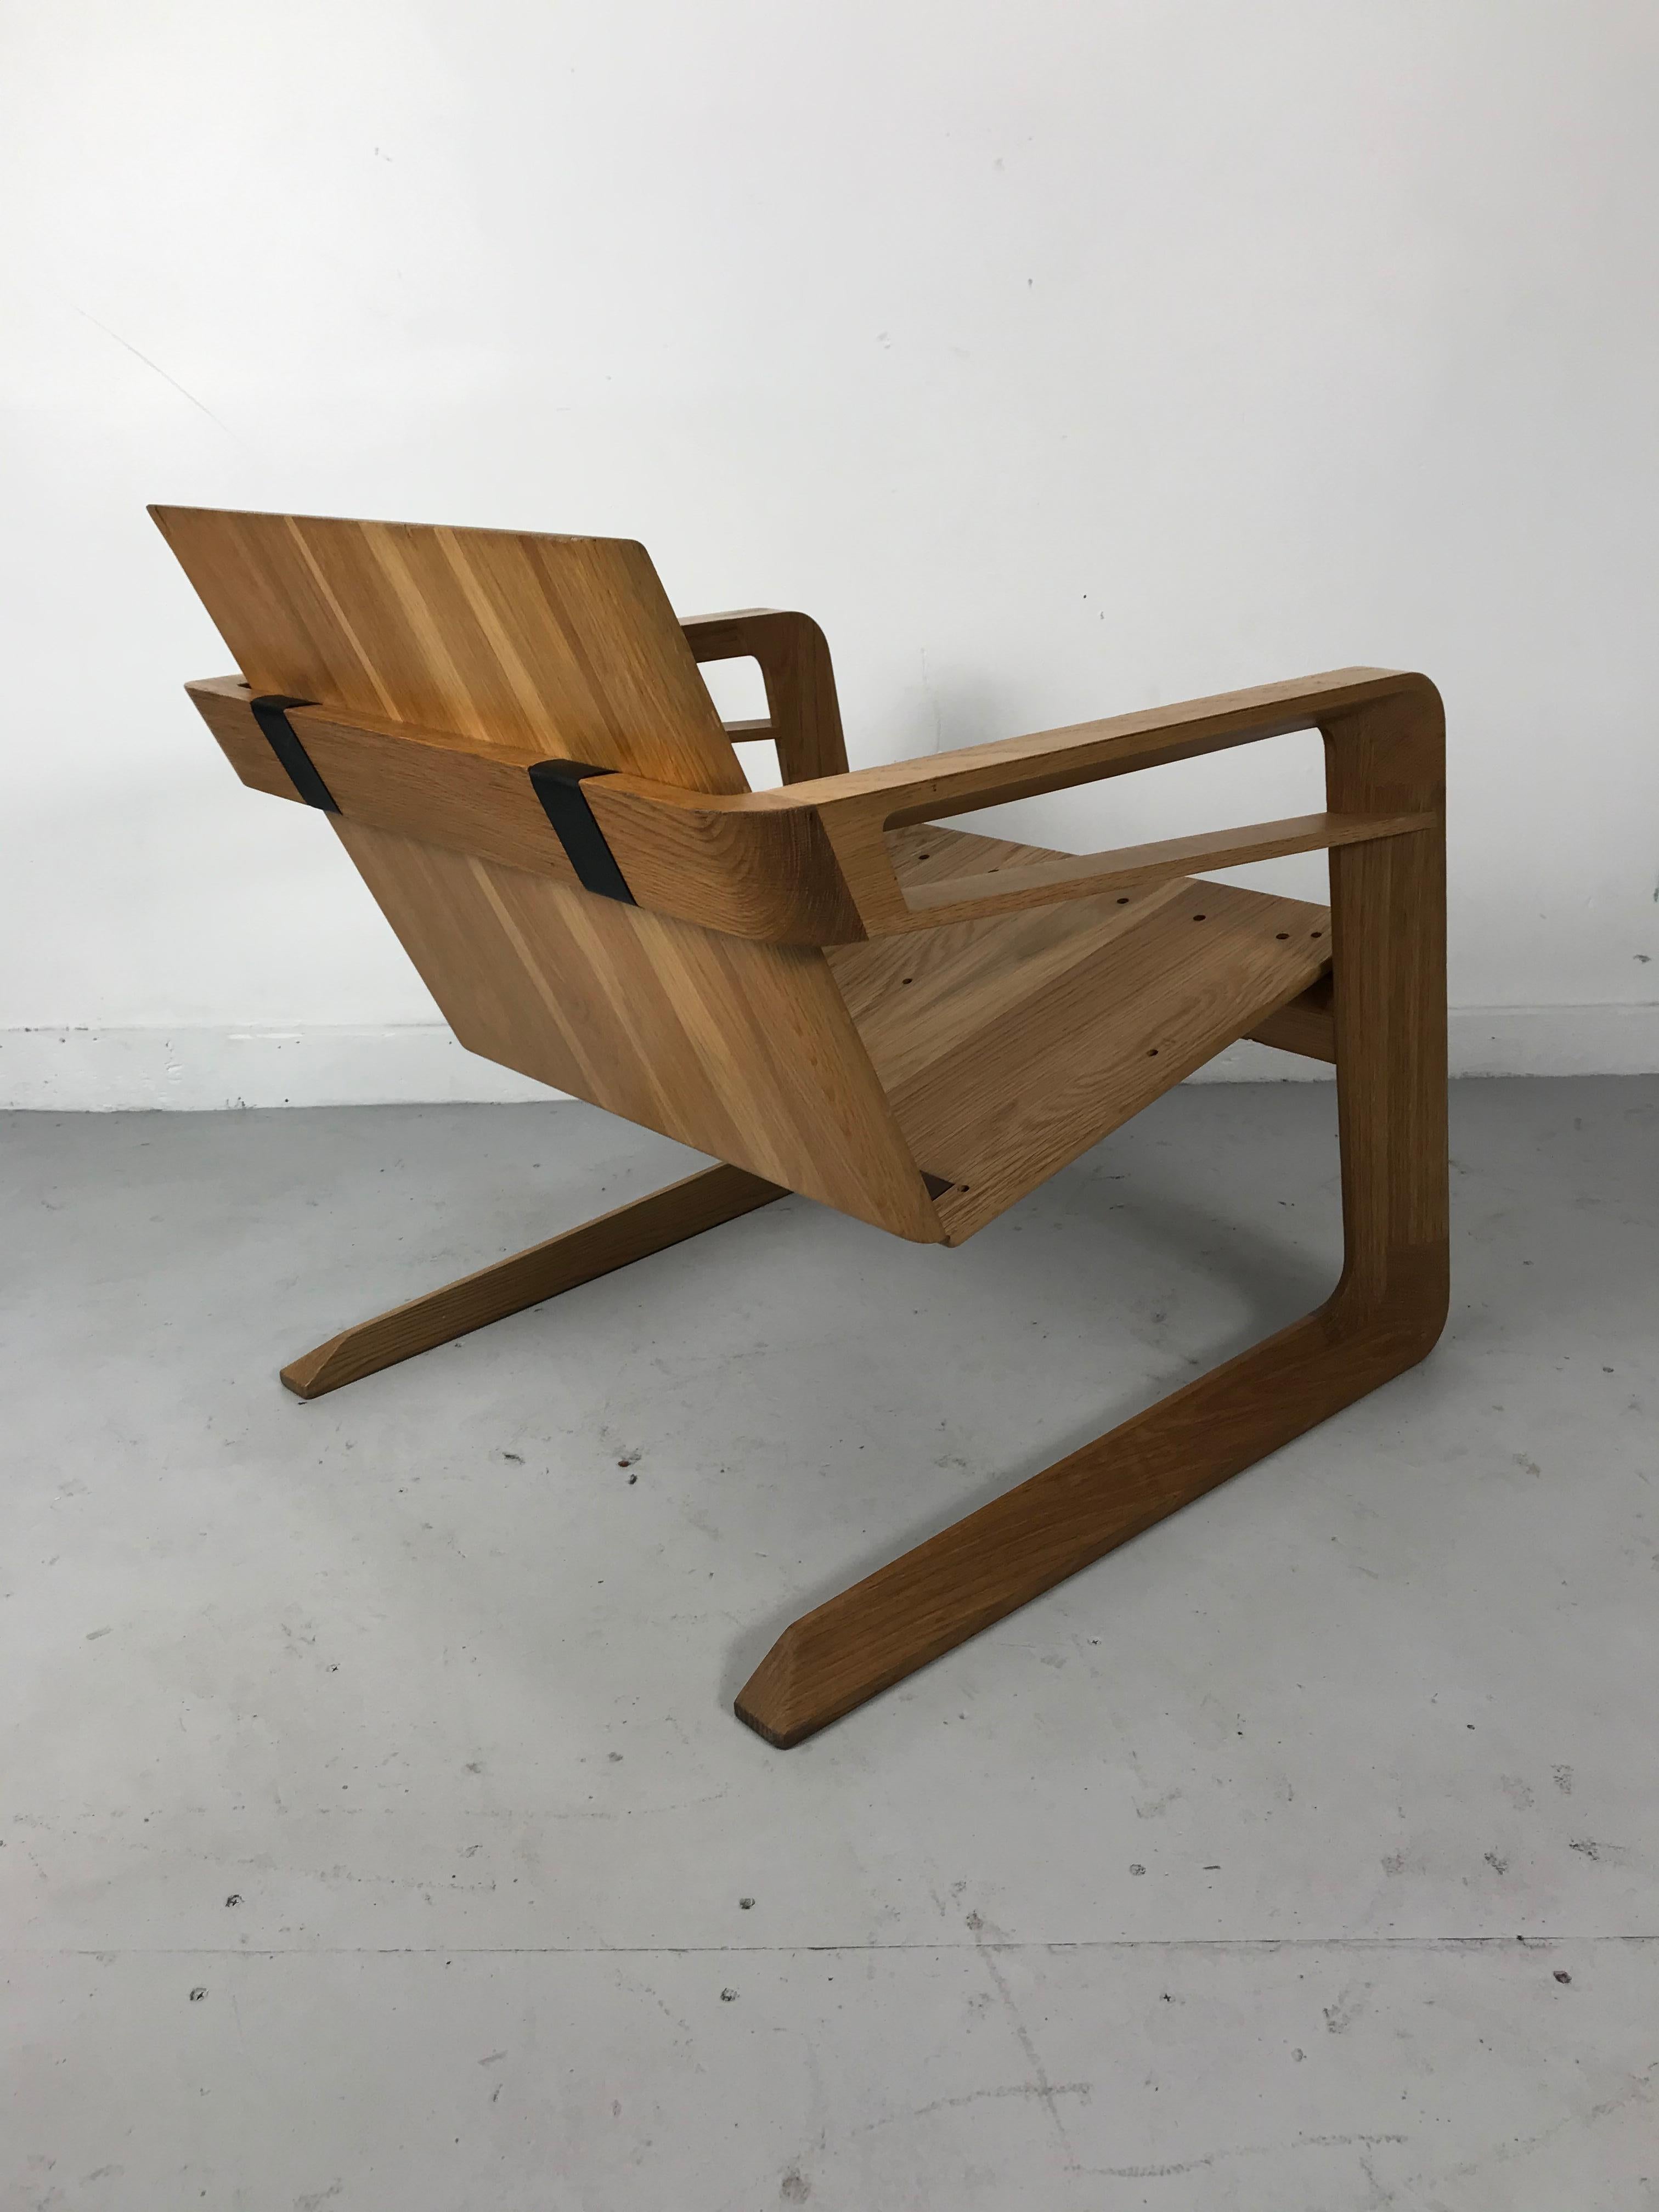 Contemporary Cory Grosser 009 Airline Chair, After Famed 1934 Airline Chair by Kem Weber For Sale